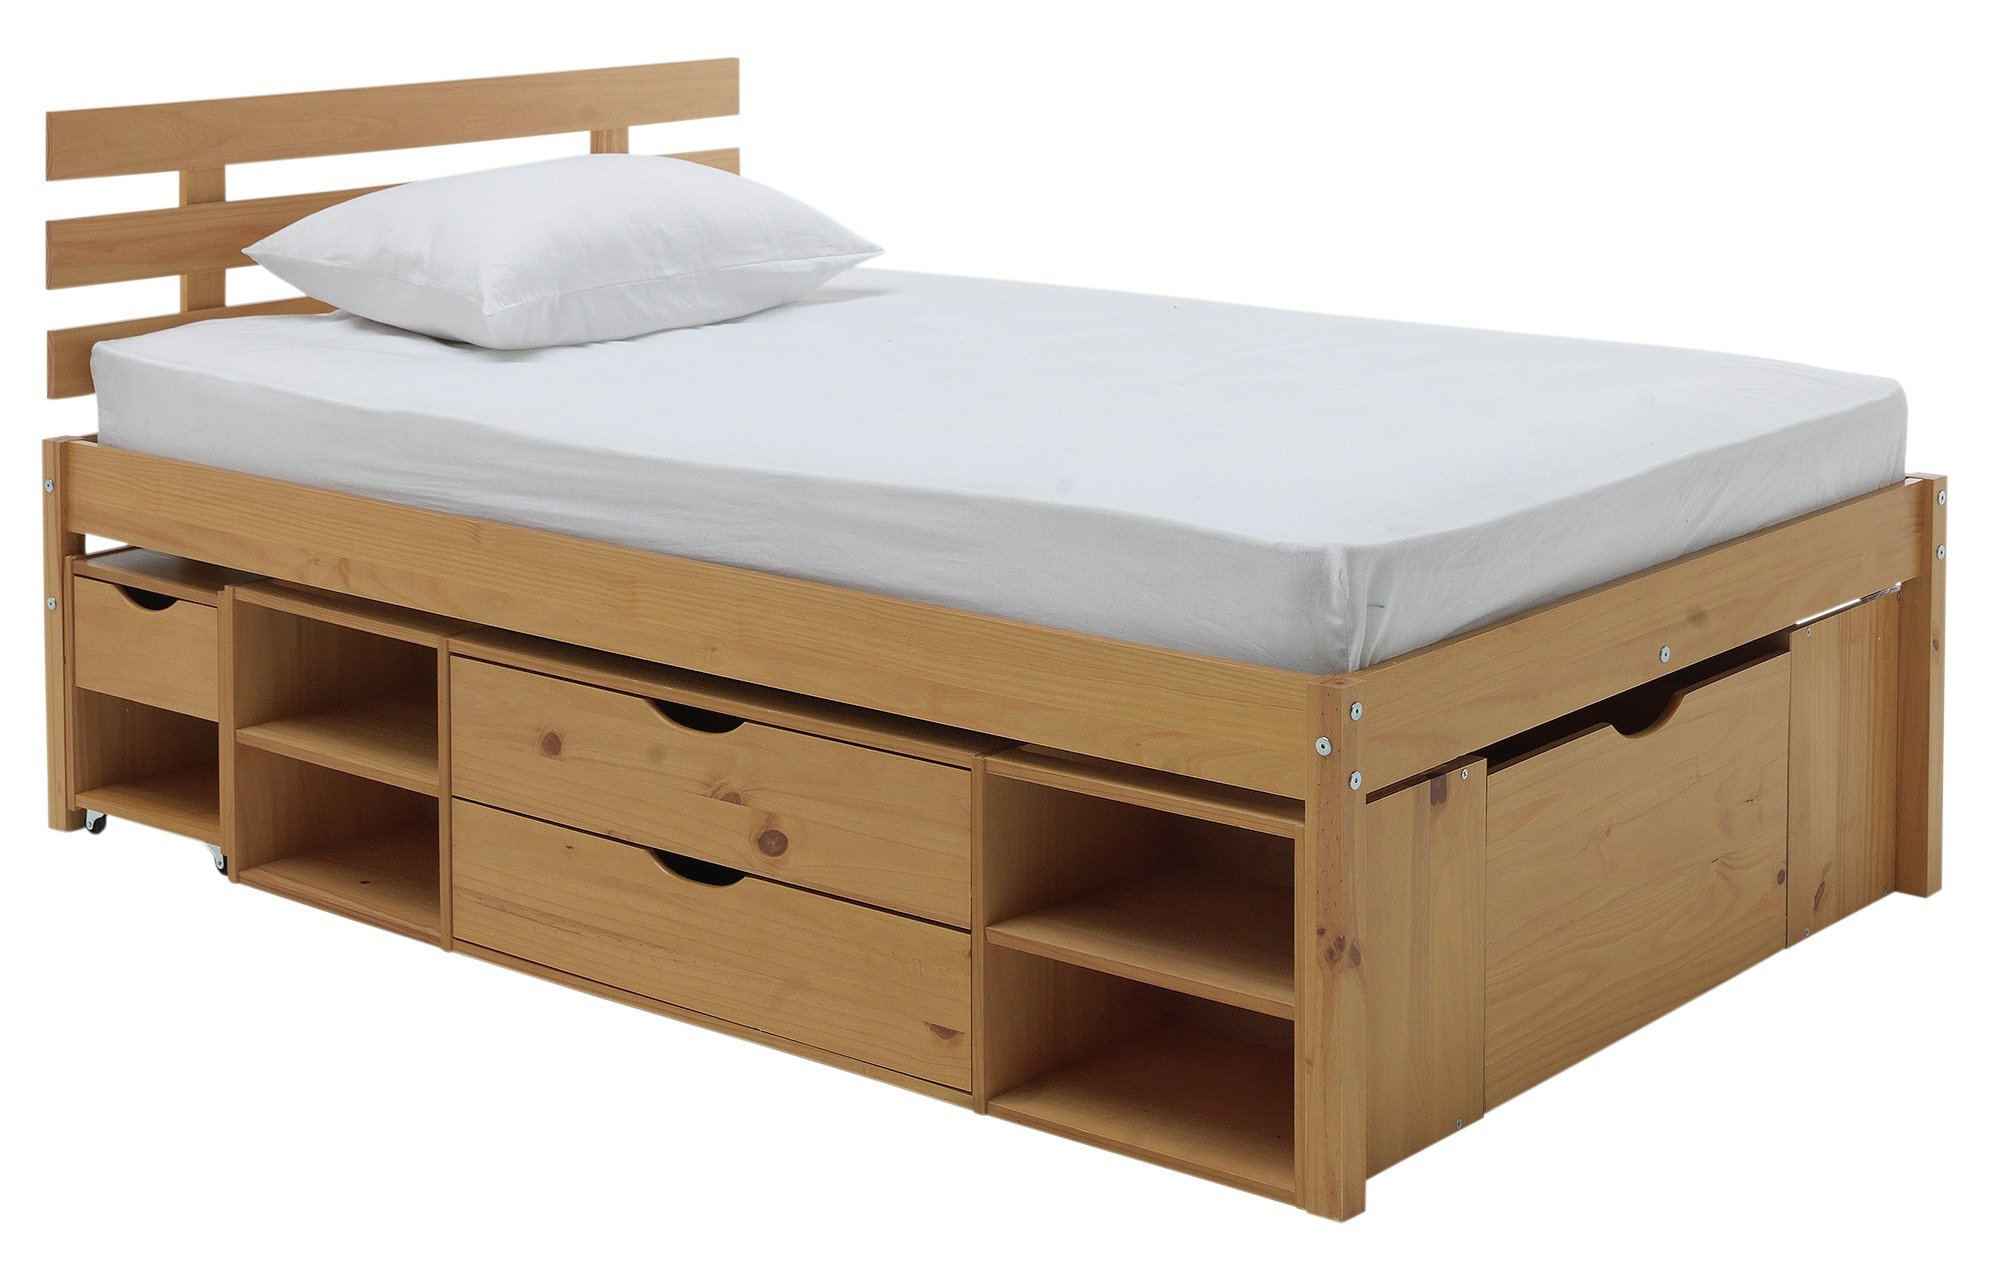 double bed frame and mattress uk